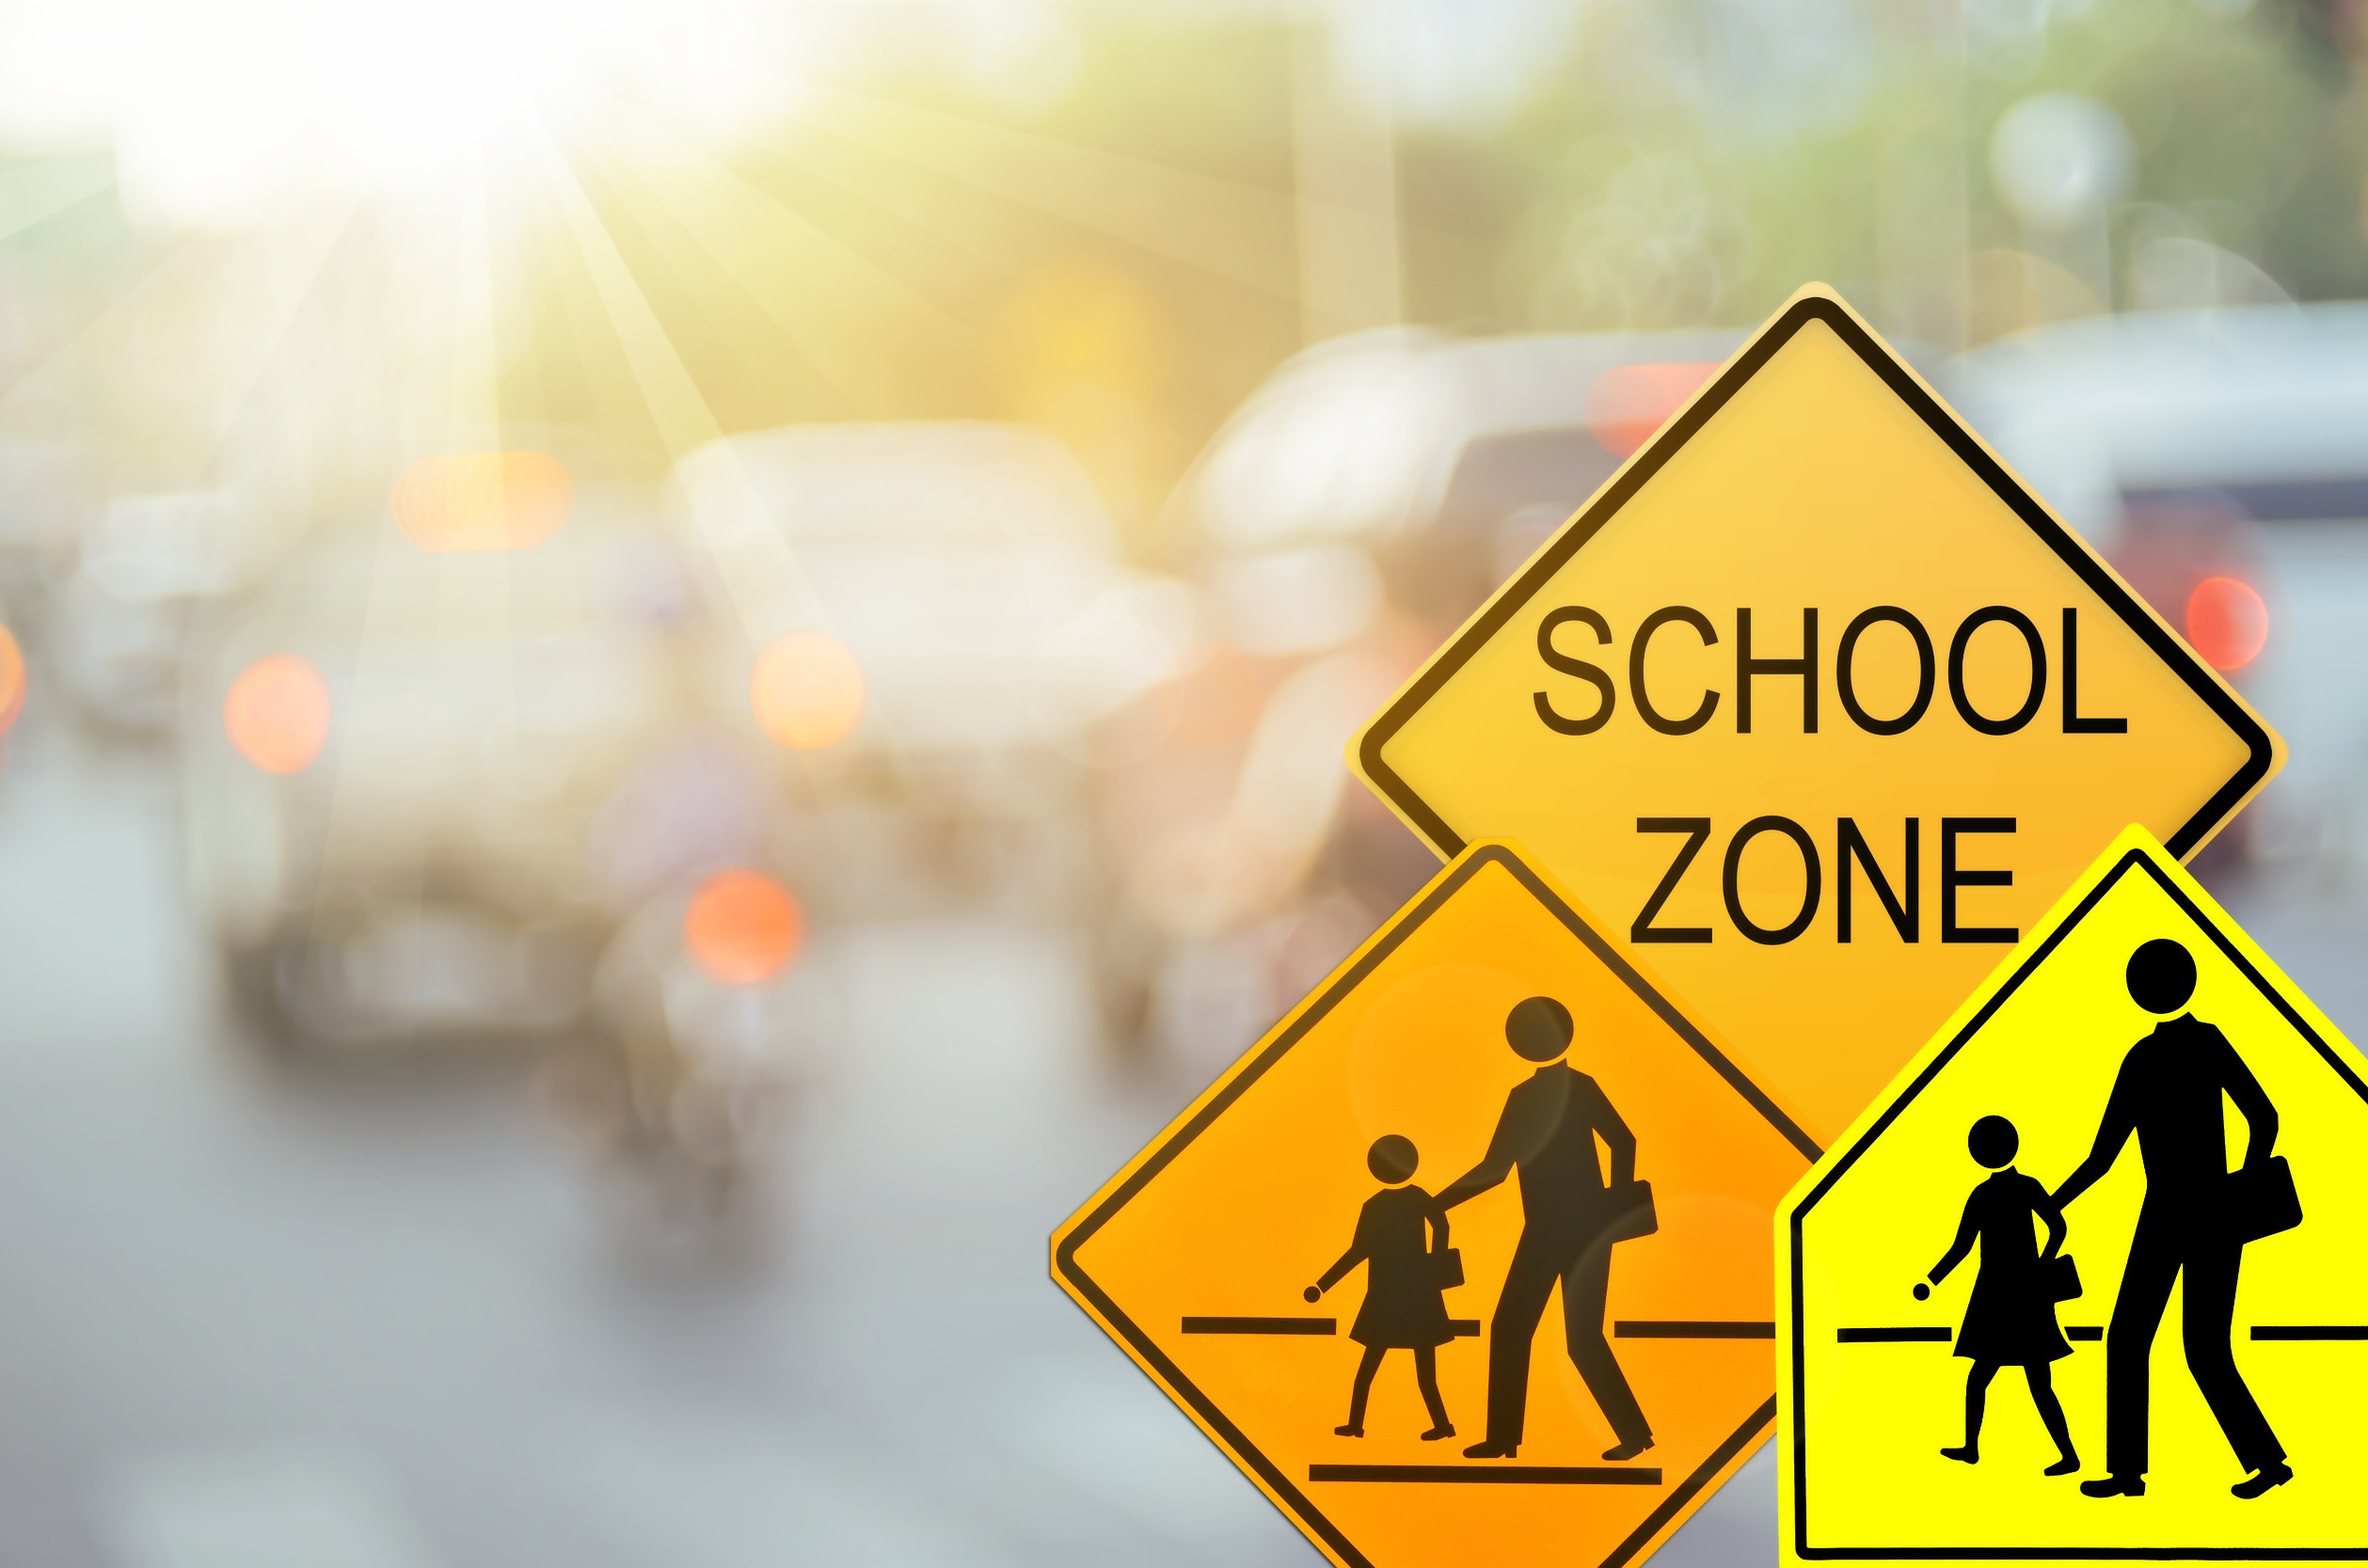 5 tips for keeping children safe when driving near school zones